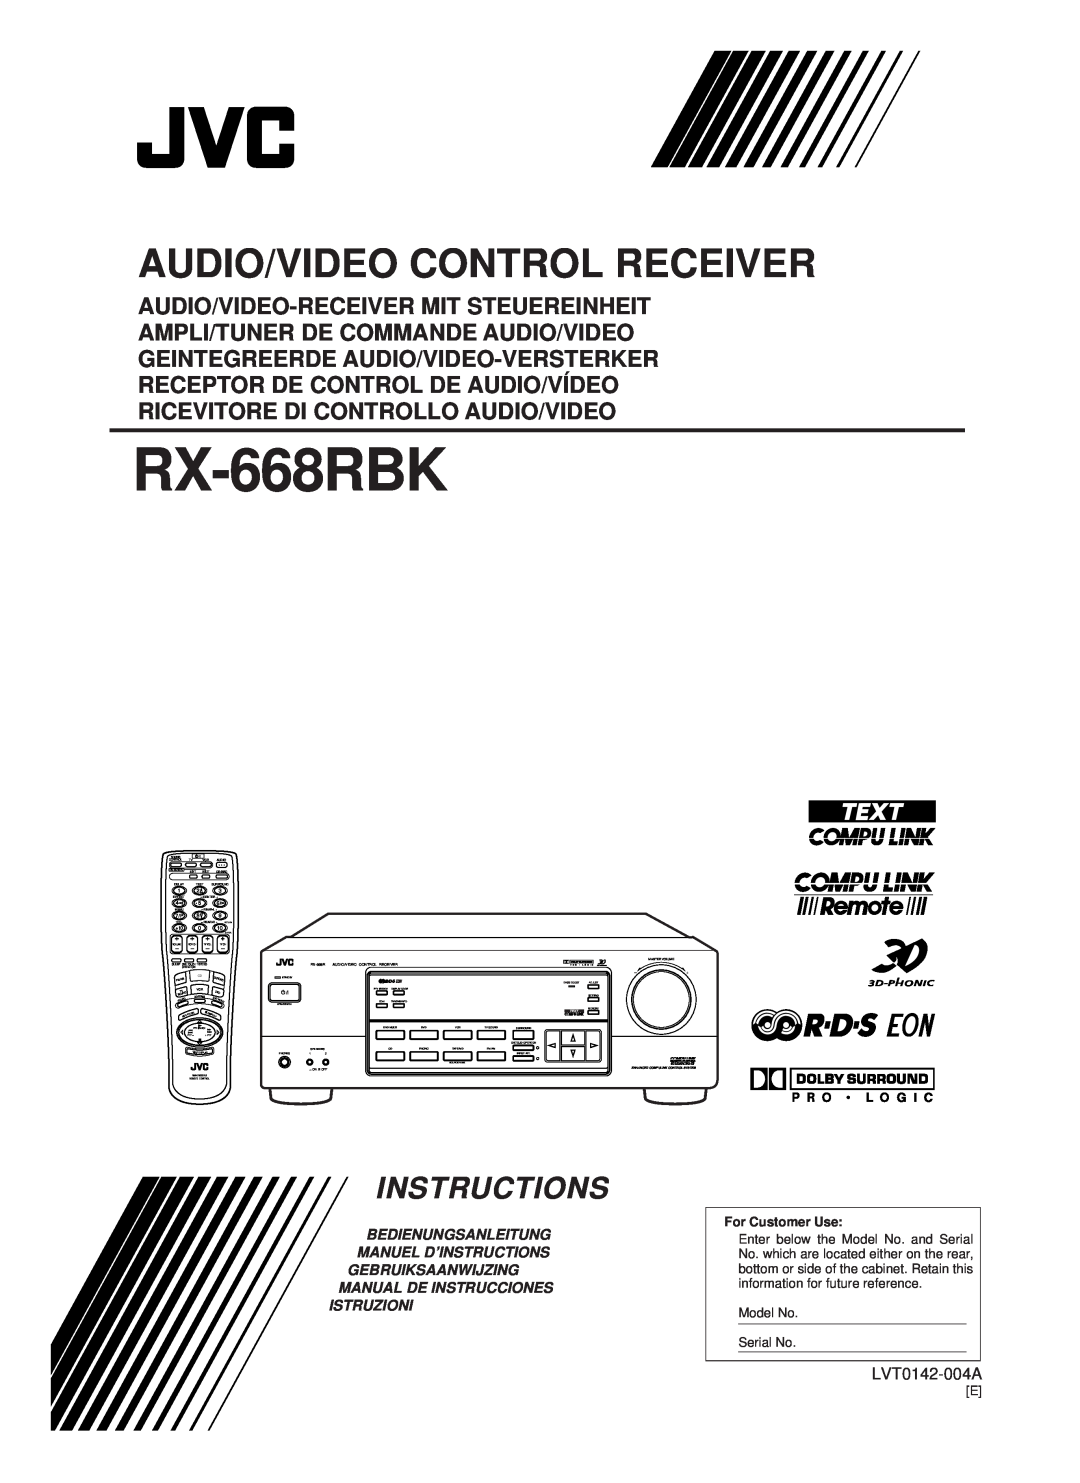 JVC RX-668RBK manual Audio/Video Control Receiver, Instructions, LVT0142-004A, For Customer Use 